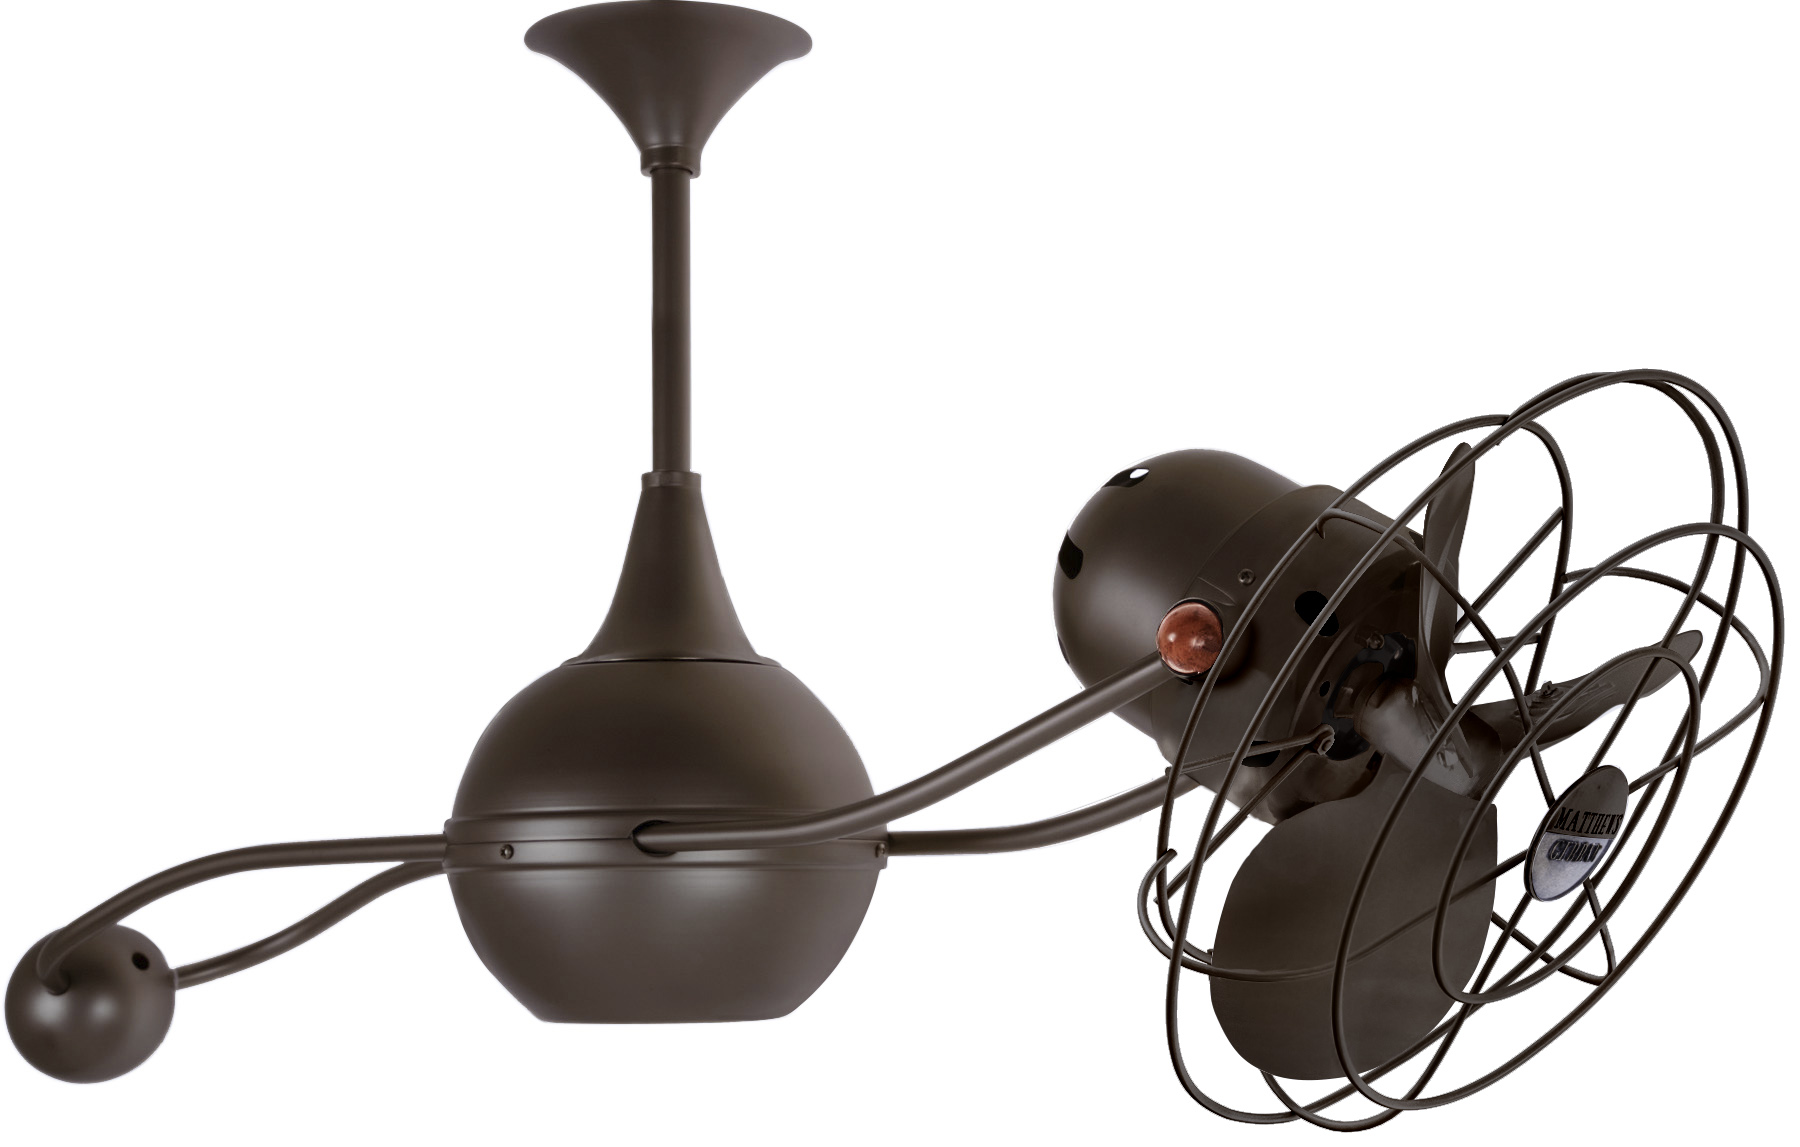 Brisa 2000 ceiling fan in bronzette finish with metal blades in decorative cage made by Matthews Fan Company.